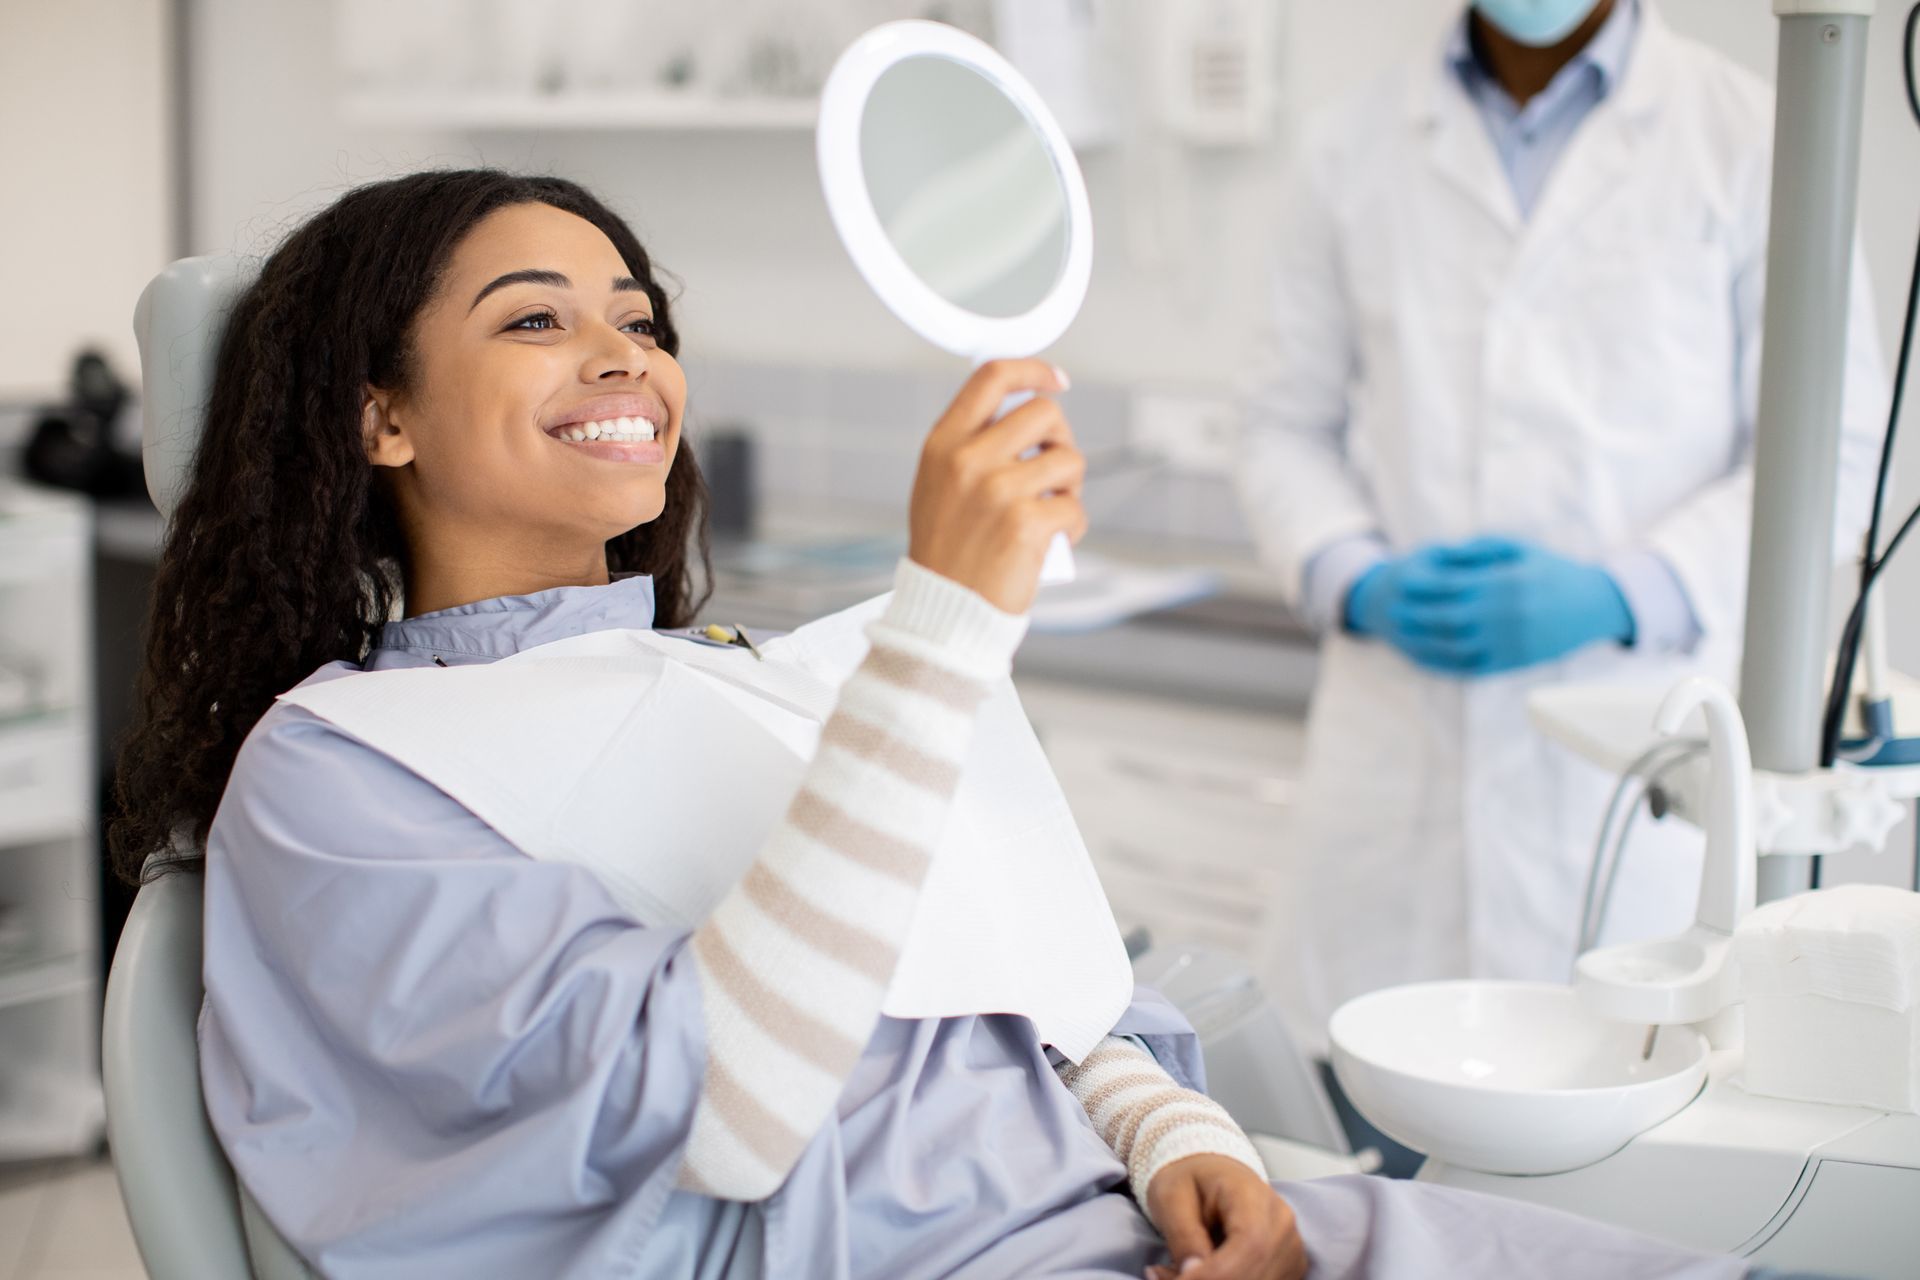 women in dentist chair smiling with white teeth